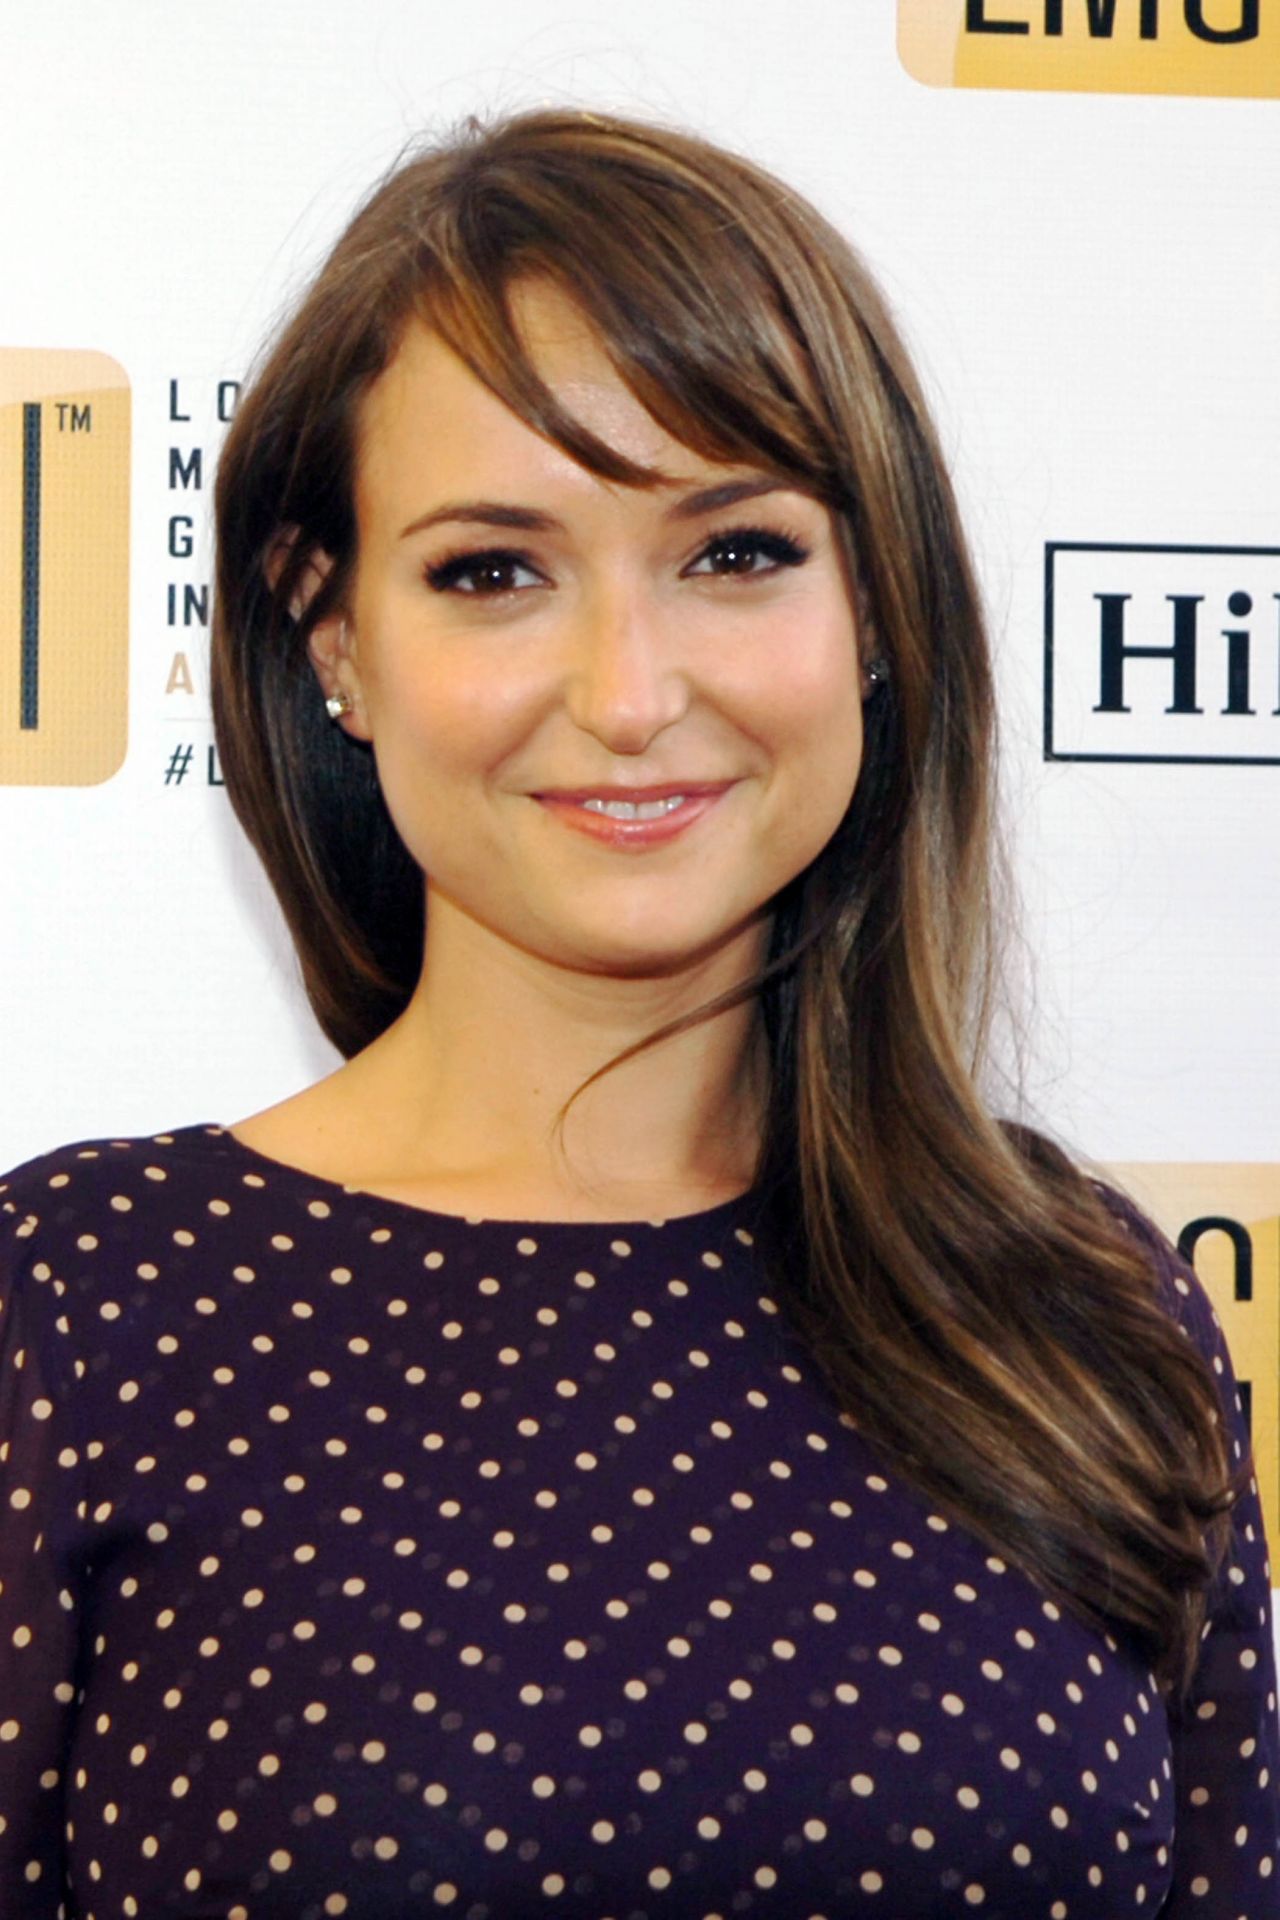 dean woodford recommends Did Milana Vayntrub Pose For Playboy